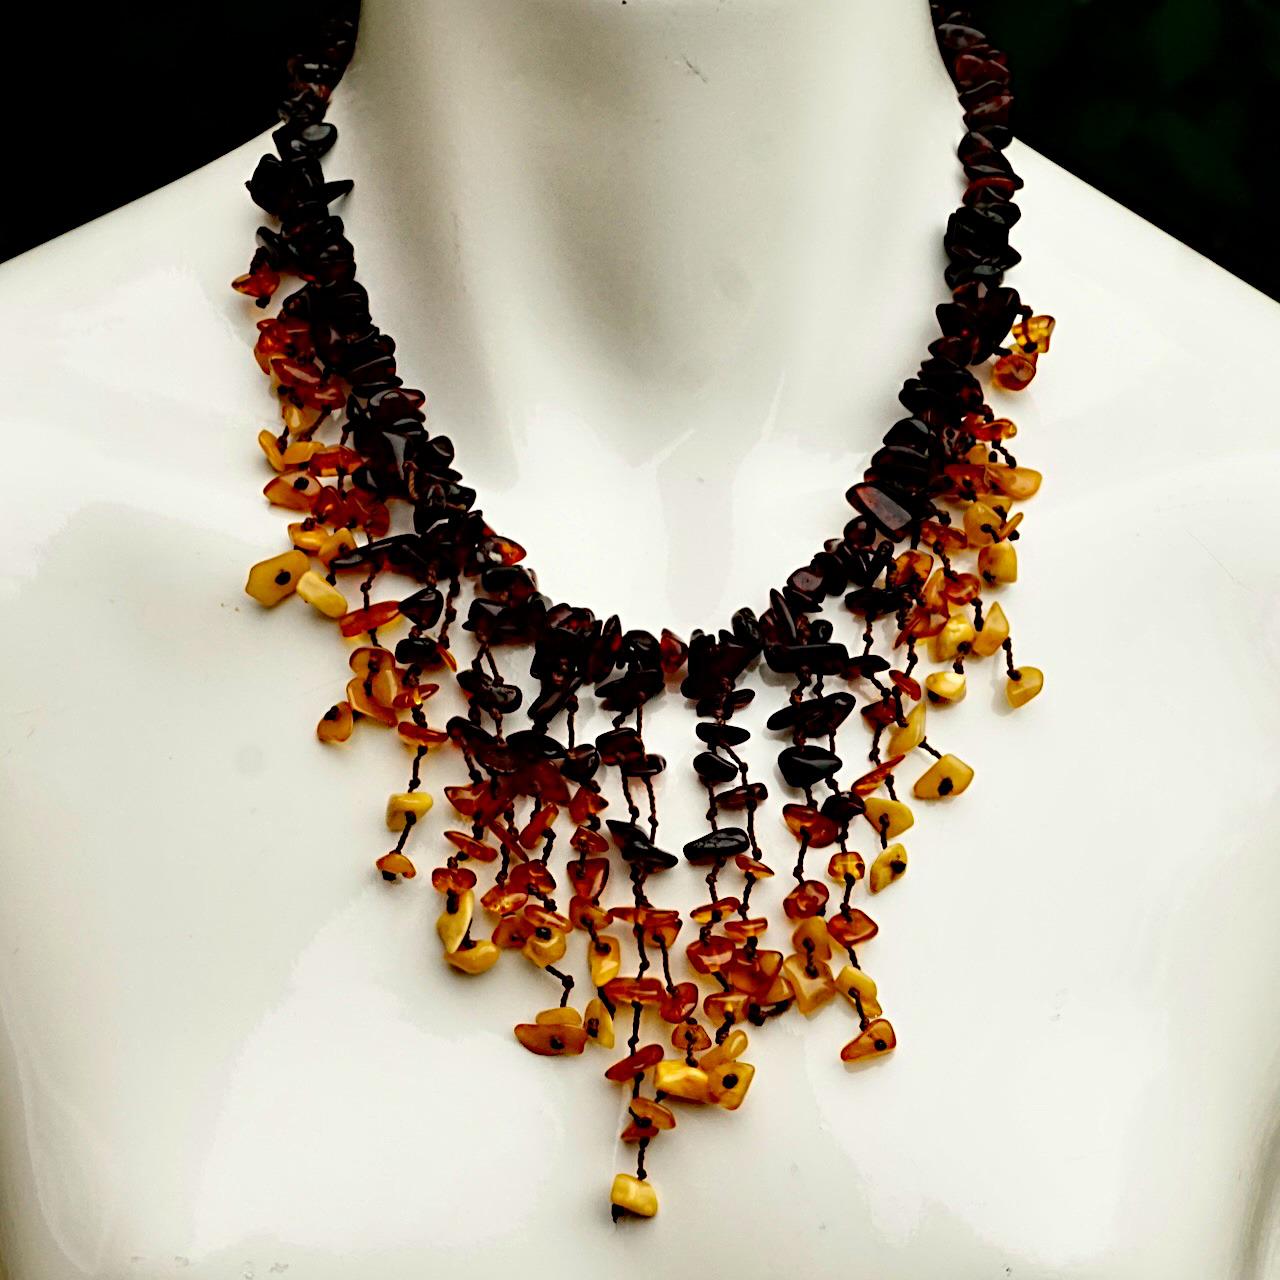 Wonderful polished amber bead necklace with beautiful amber drops in three colours. The necklace length is 44 cm / 17.3 inches, and the longest drop is 8.5 cm / 3.3 inches. The necklace is in very good condition, there is possibly one drop missing.